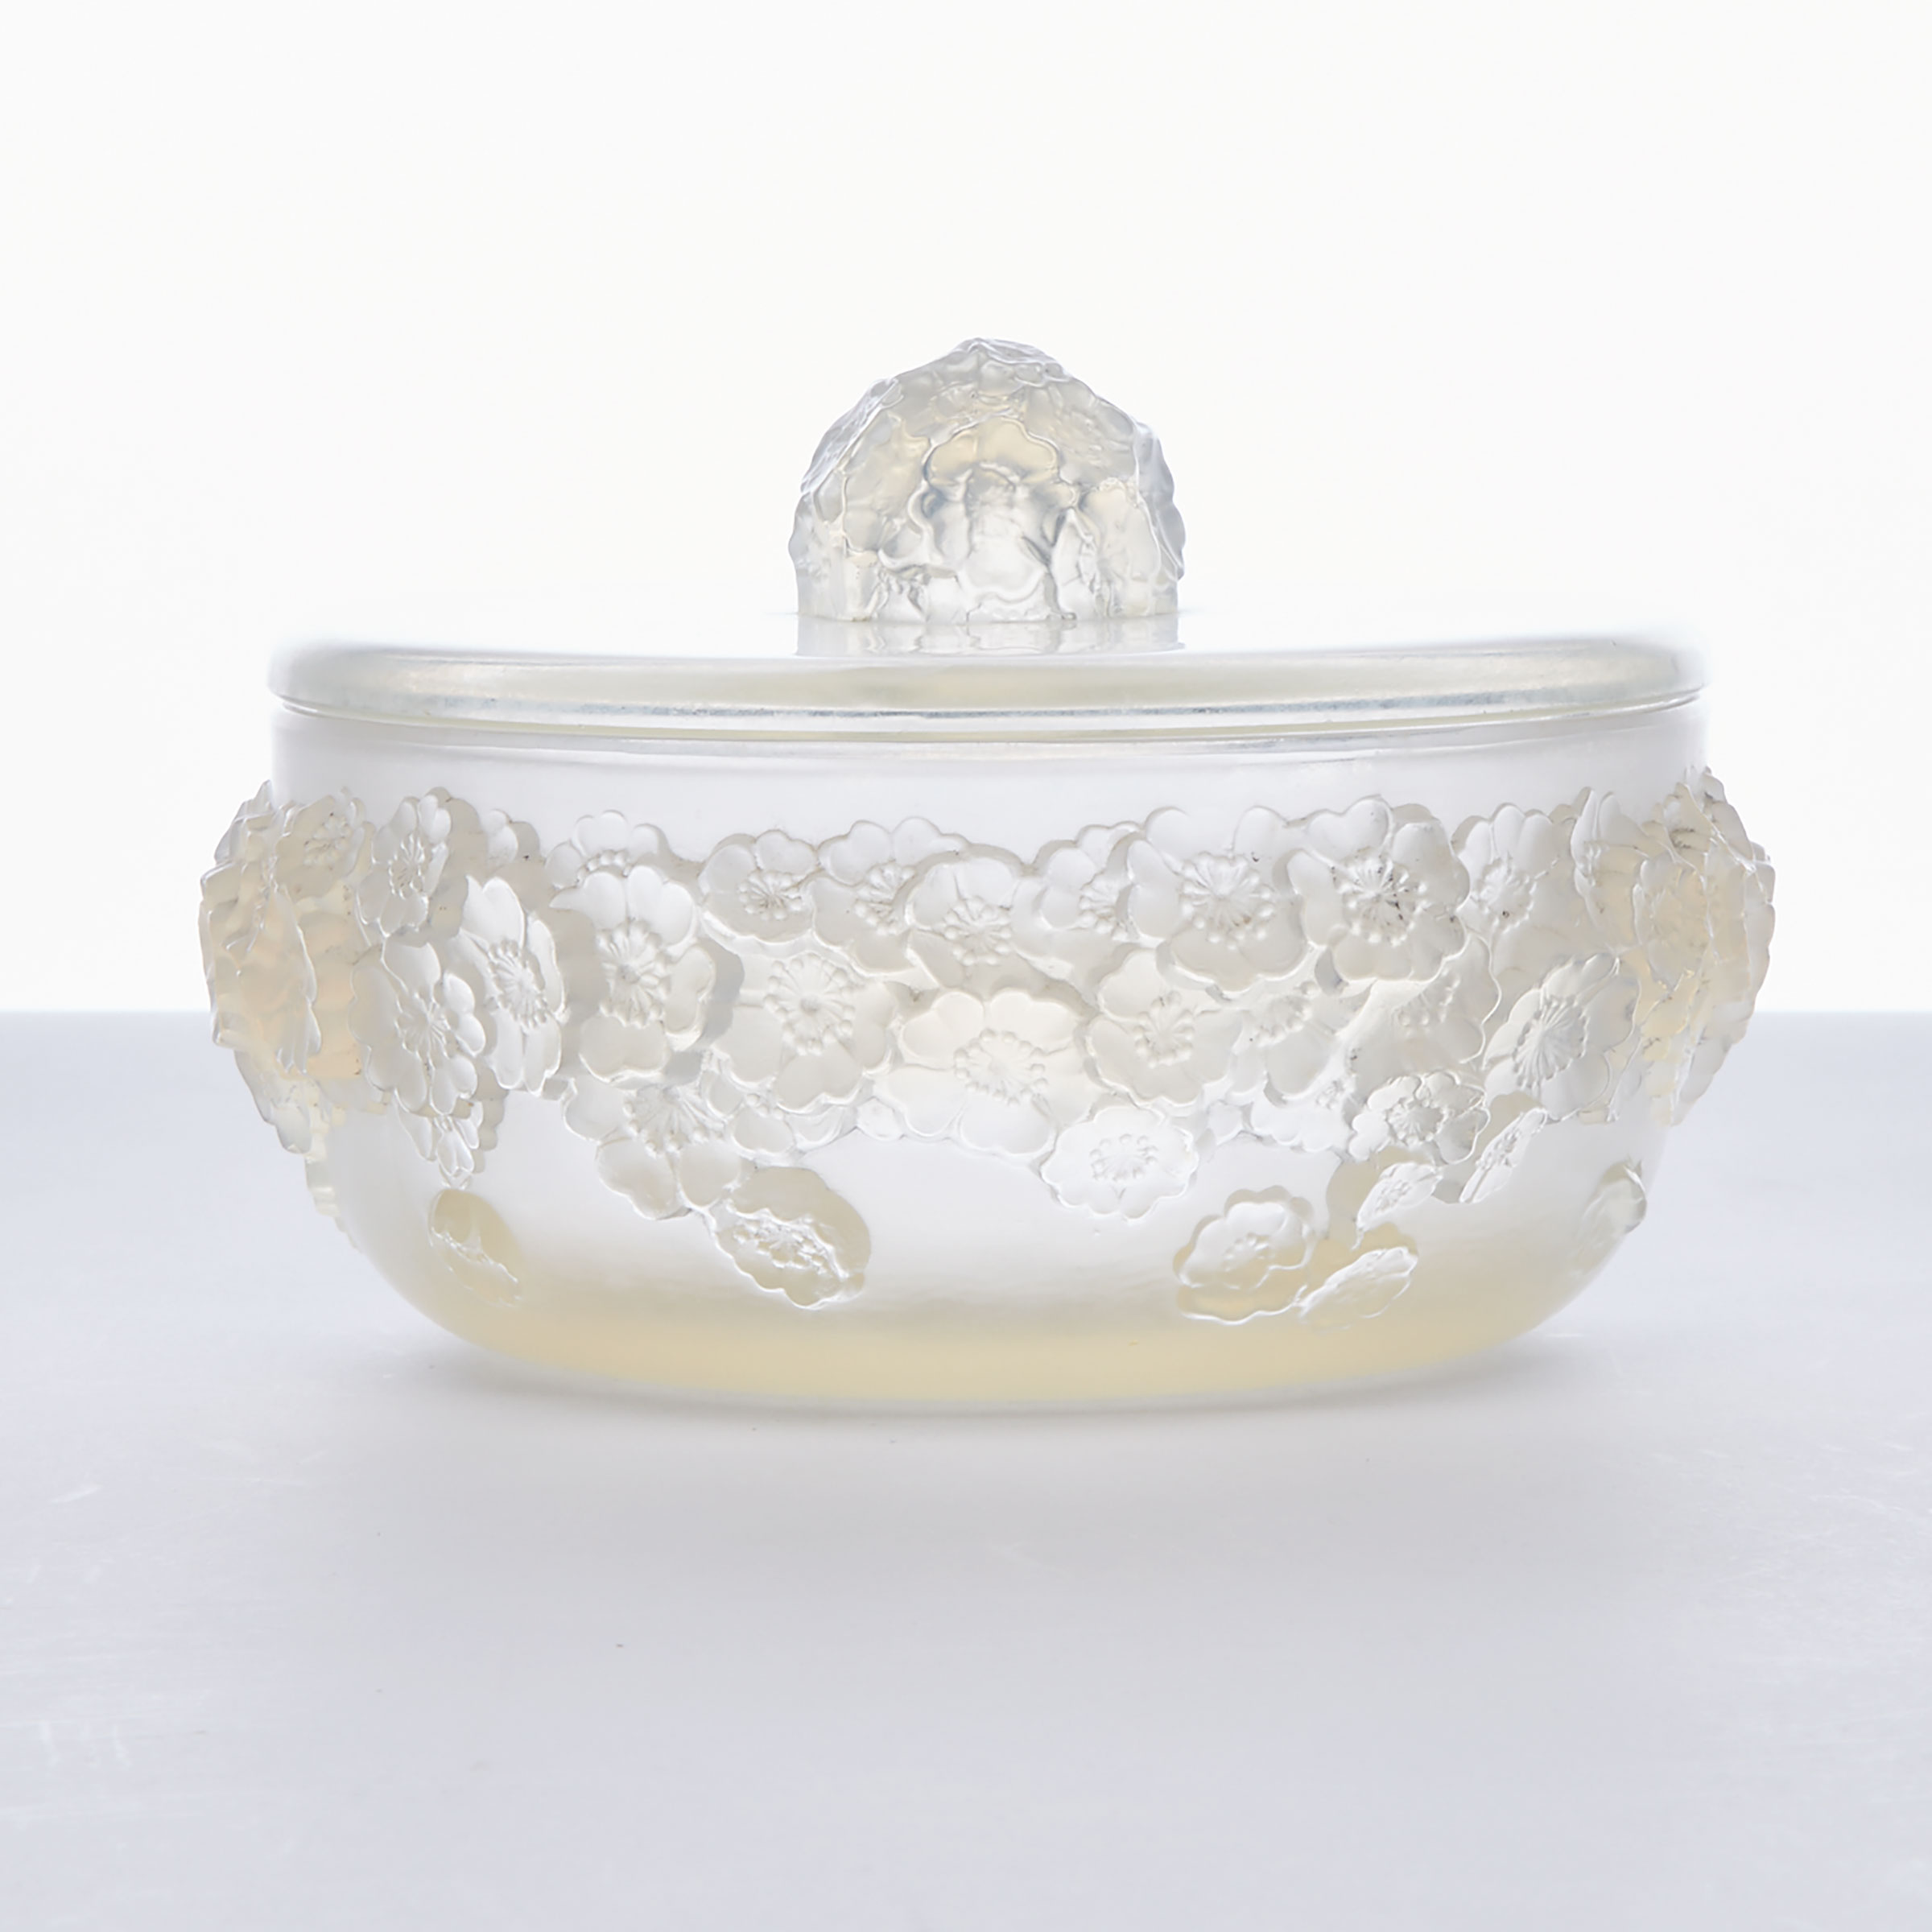 ‘Primevères’, Lalique Moulded and Partly Frosted Opalescent Glass Circular Covered Box, 1930s